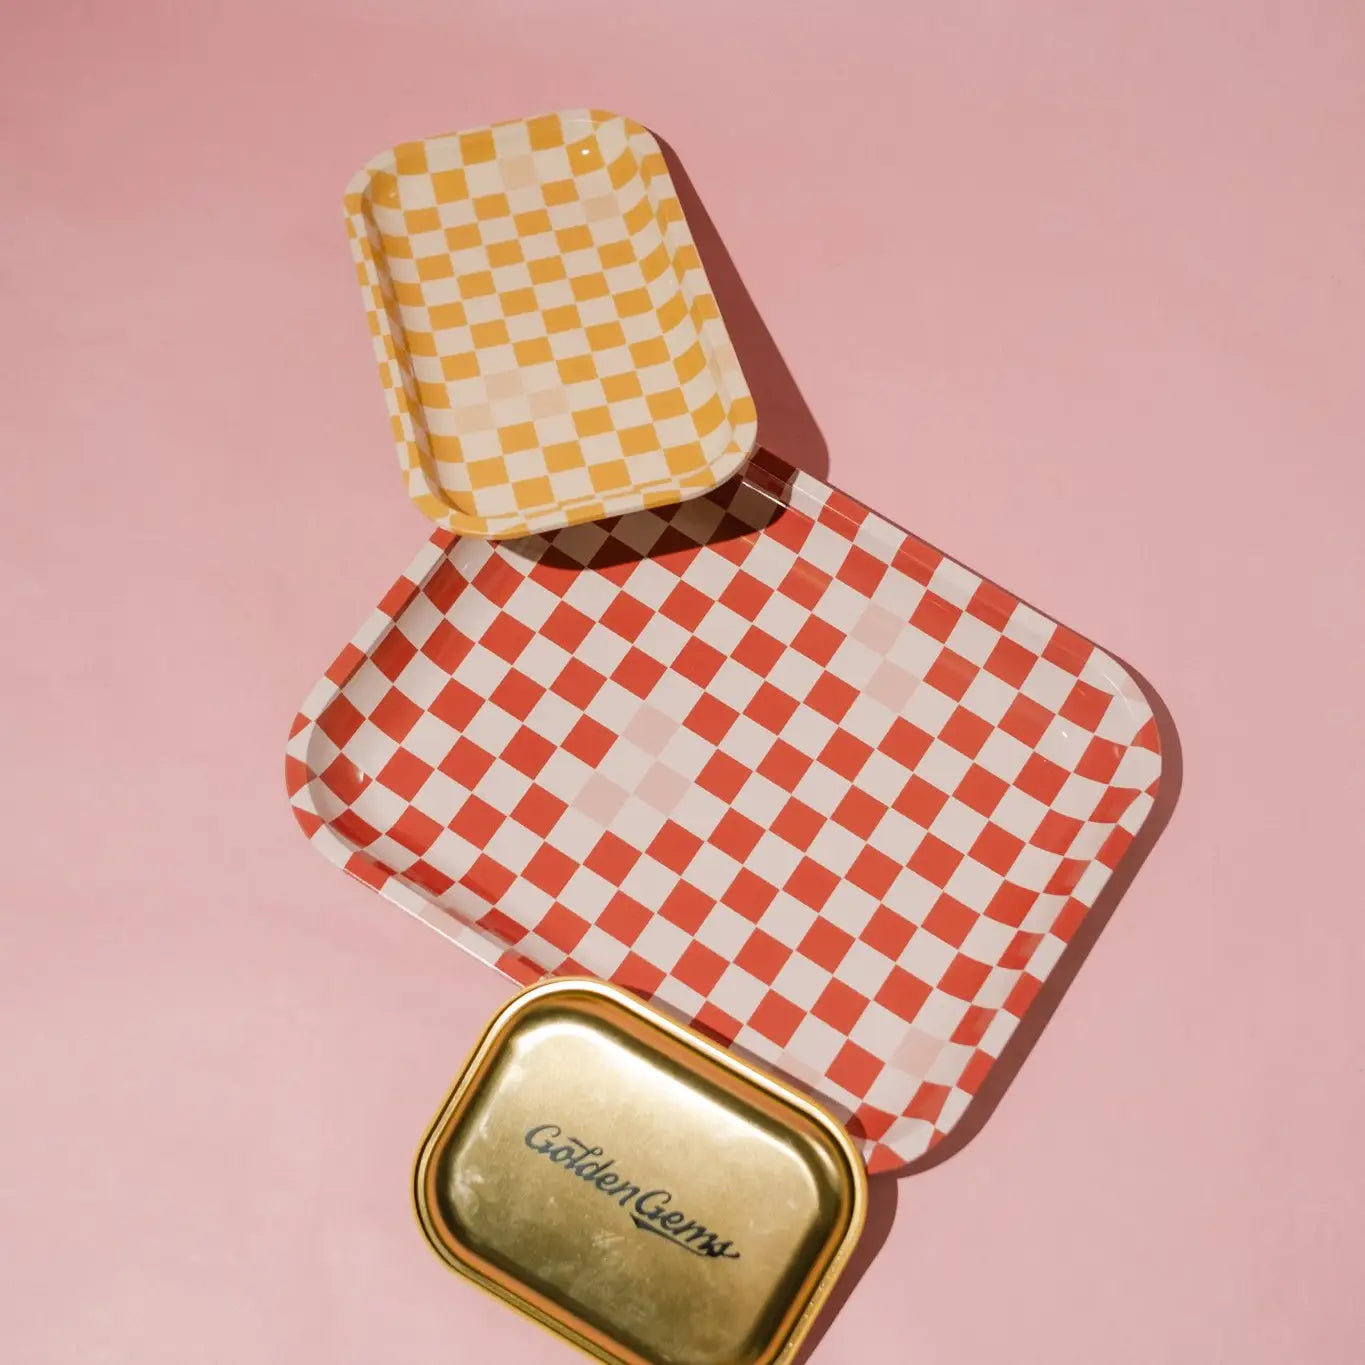 Red + Pink Checkered Large Tray